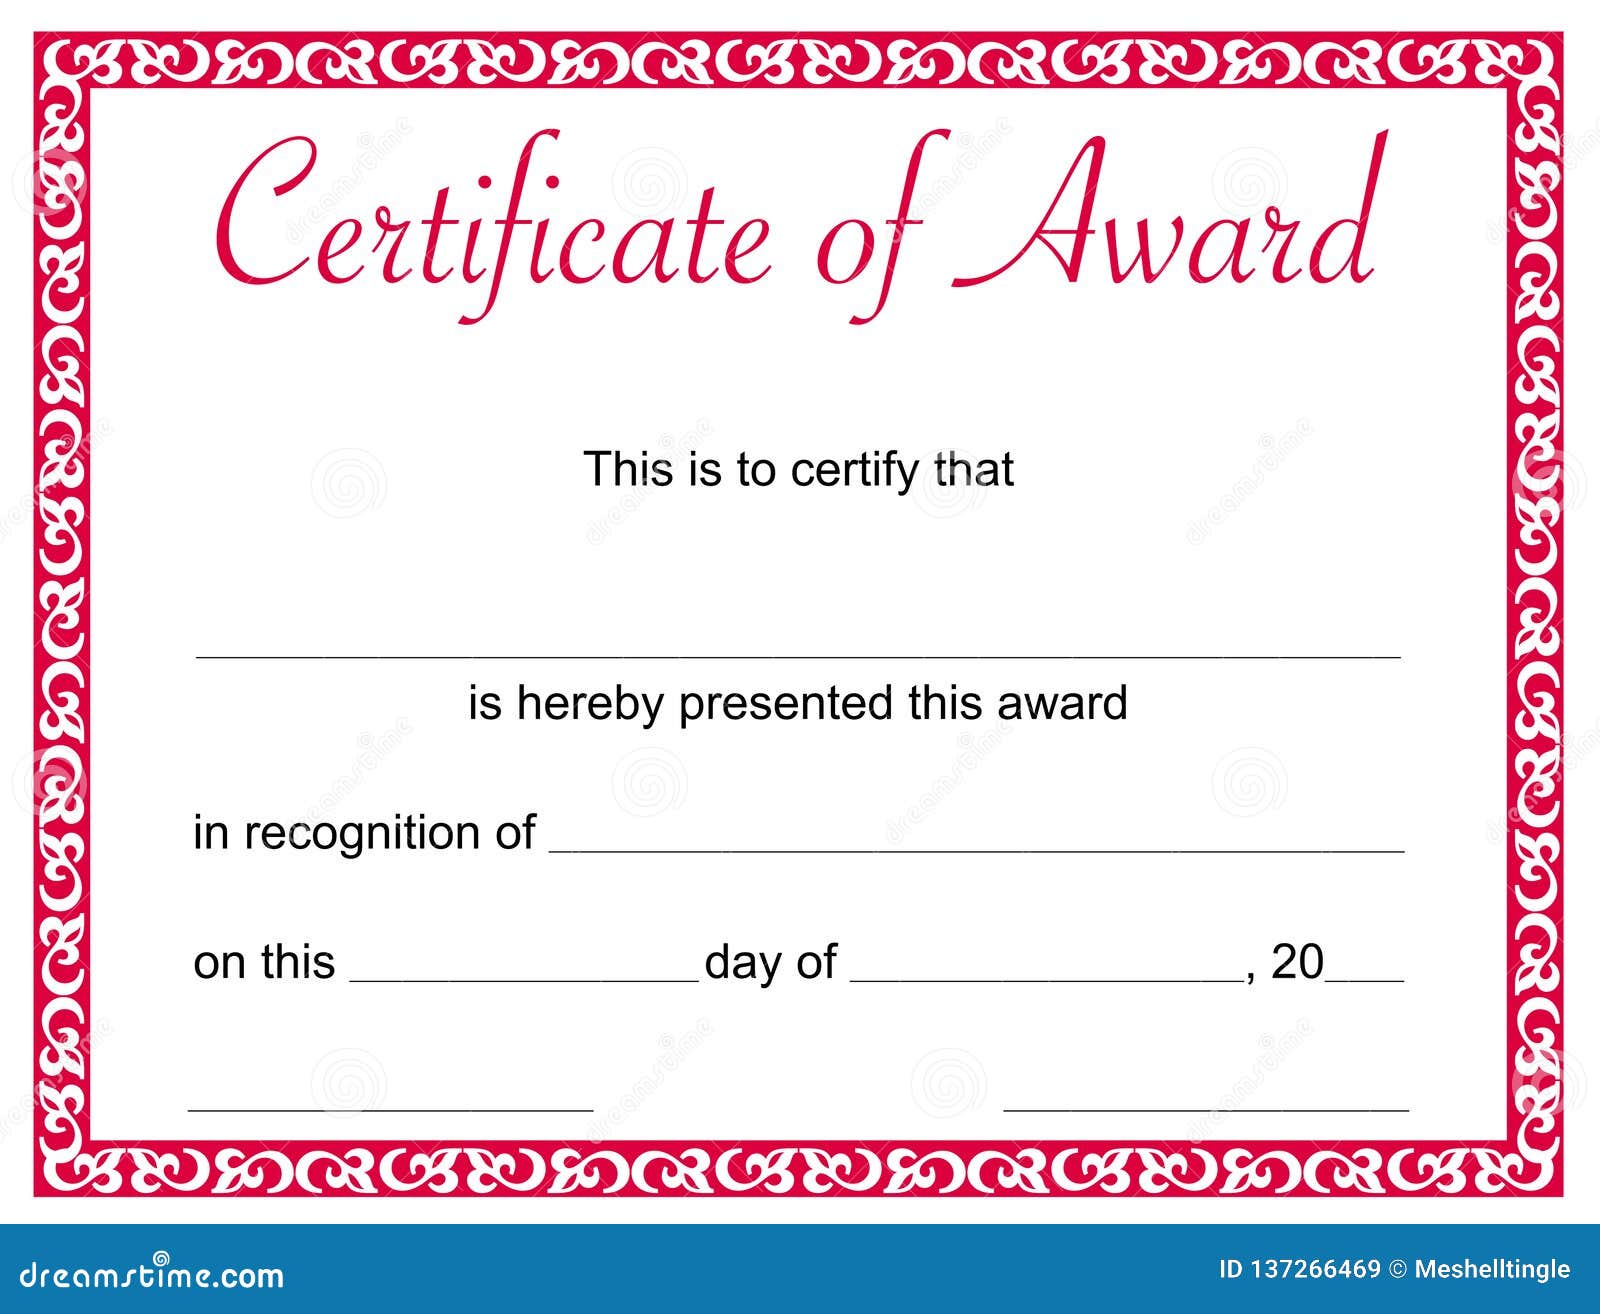 Prize Certificate Template from thumbs.dreamstime.com